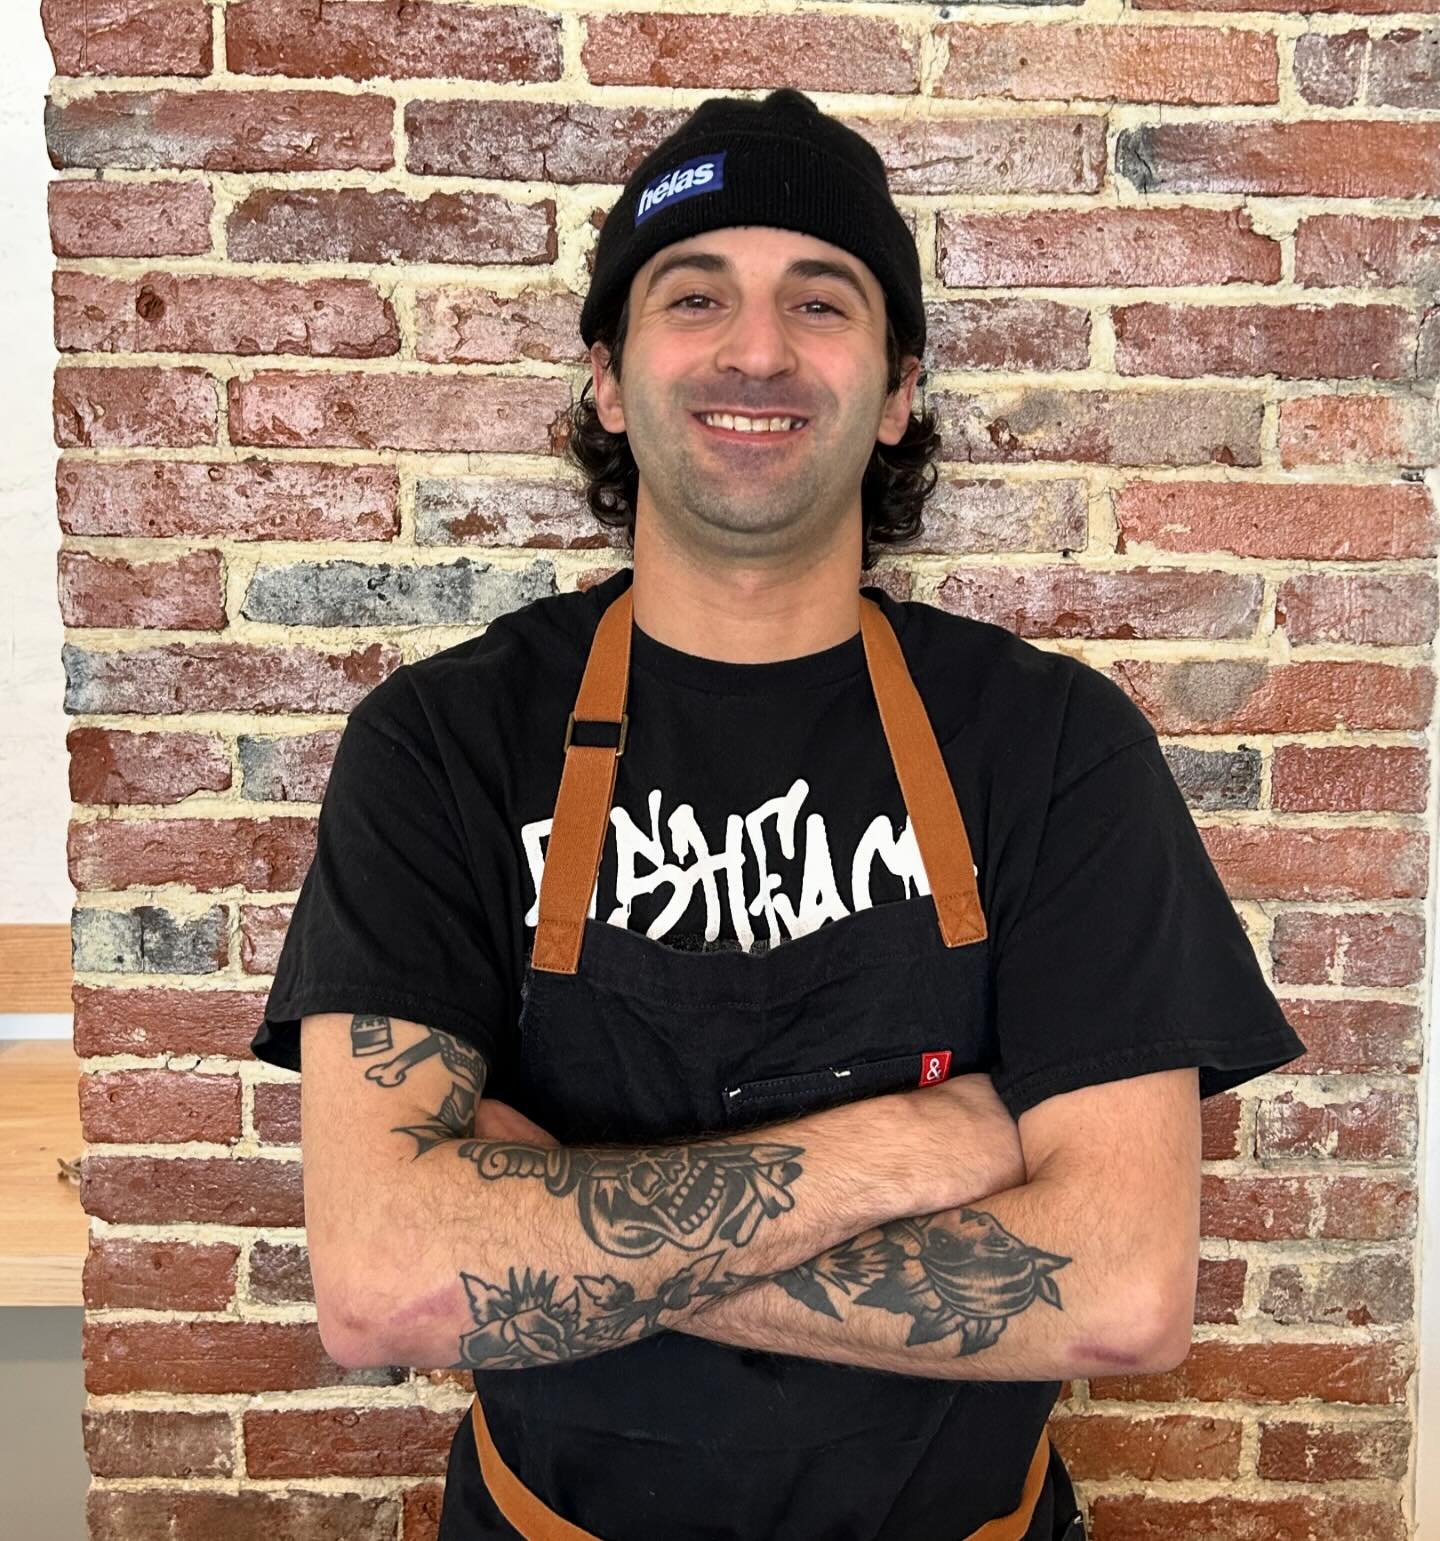 Meet @johnny.rigatoni .  Johnny likes rolling pasta, hyping up the kitchen and stomping kick flips.  He&rsquo;s from Jersey but we don&rsquo;t judge him for that around here.  We are beyond excited to have him on our team as our opening sous chef and